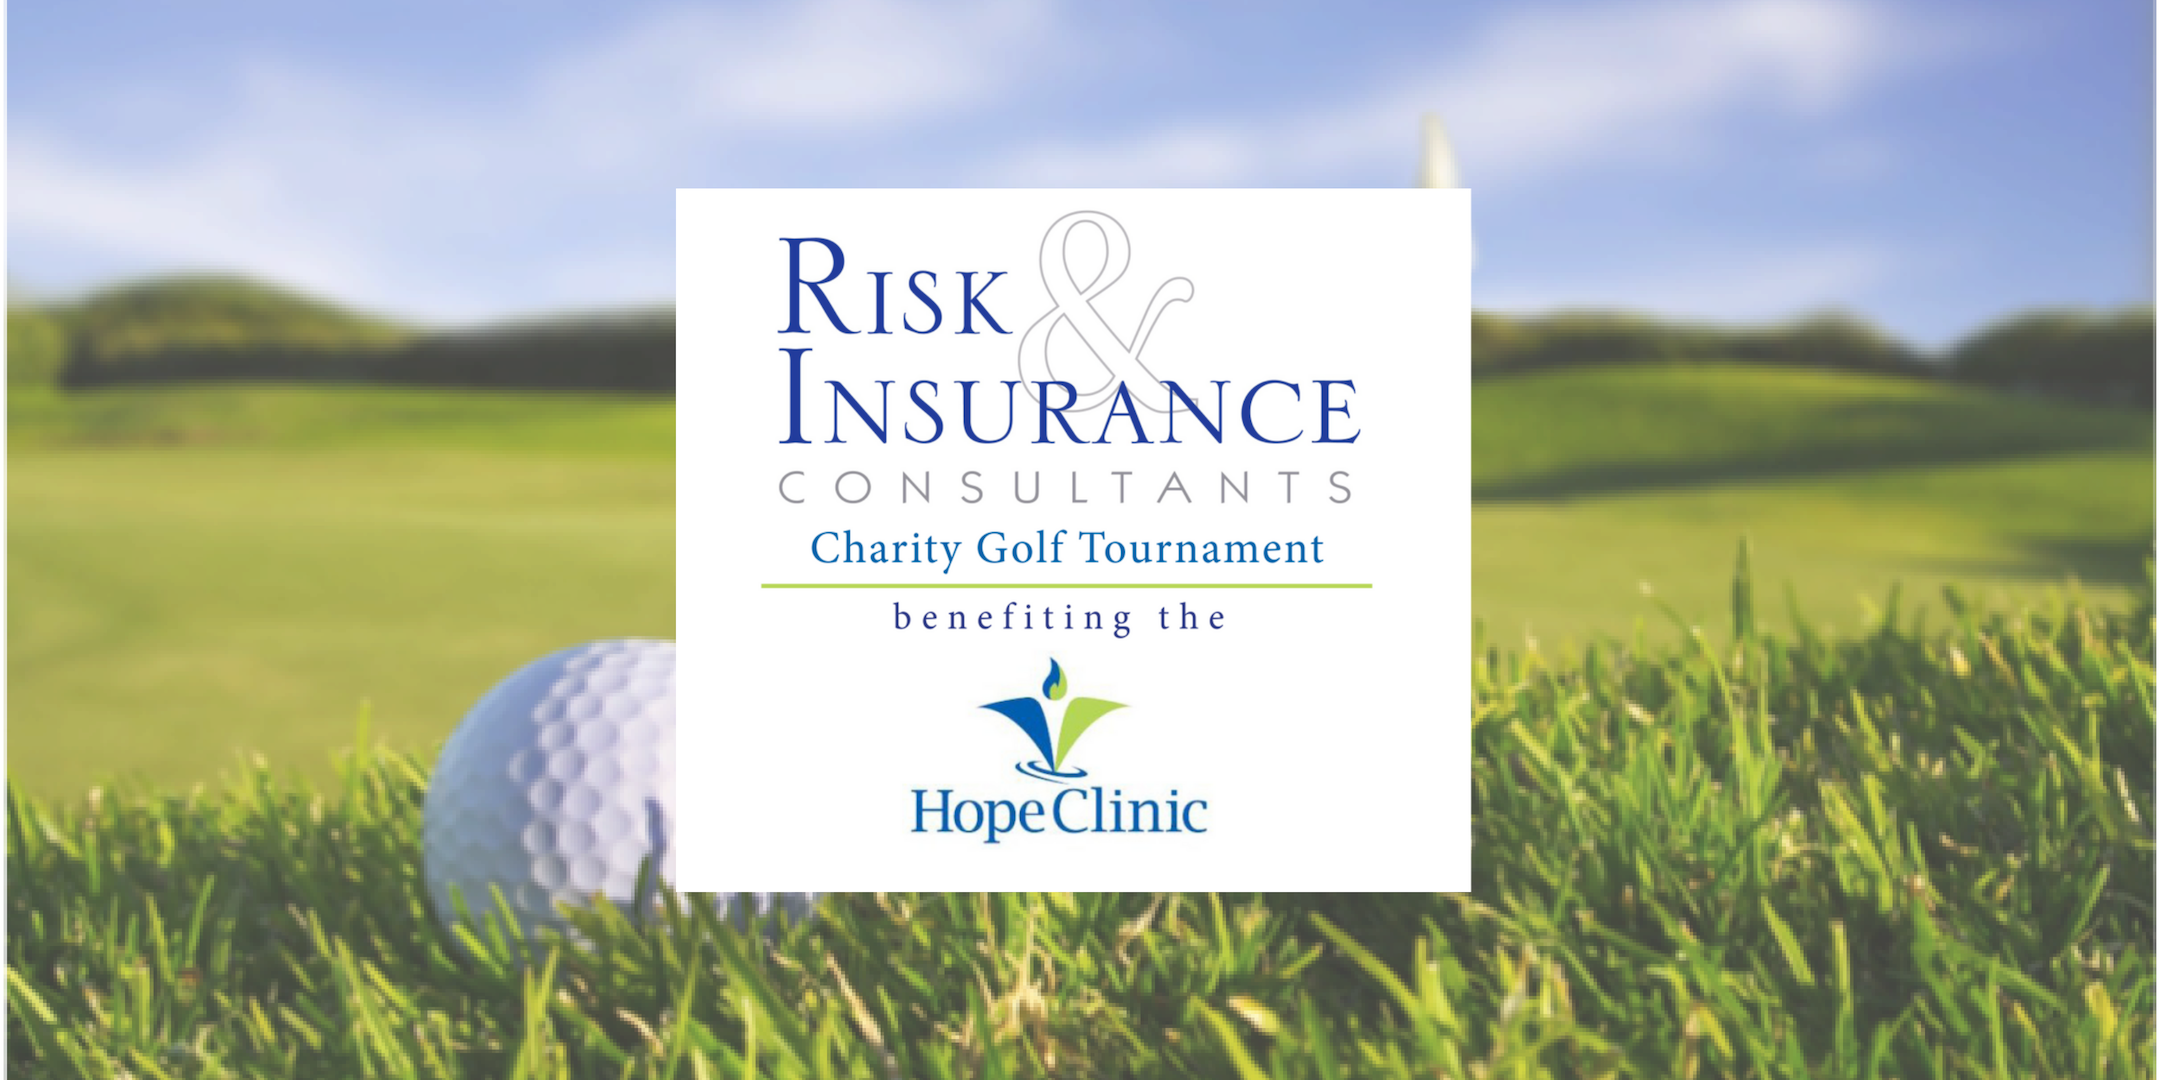 Risk and Insurance Consultants Charity Golf Tournament